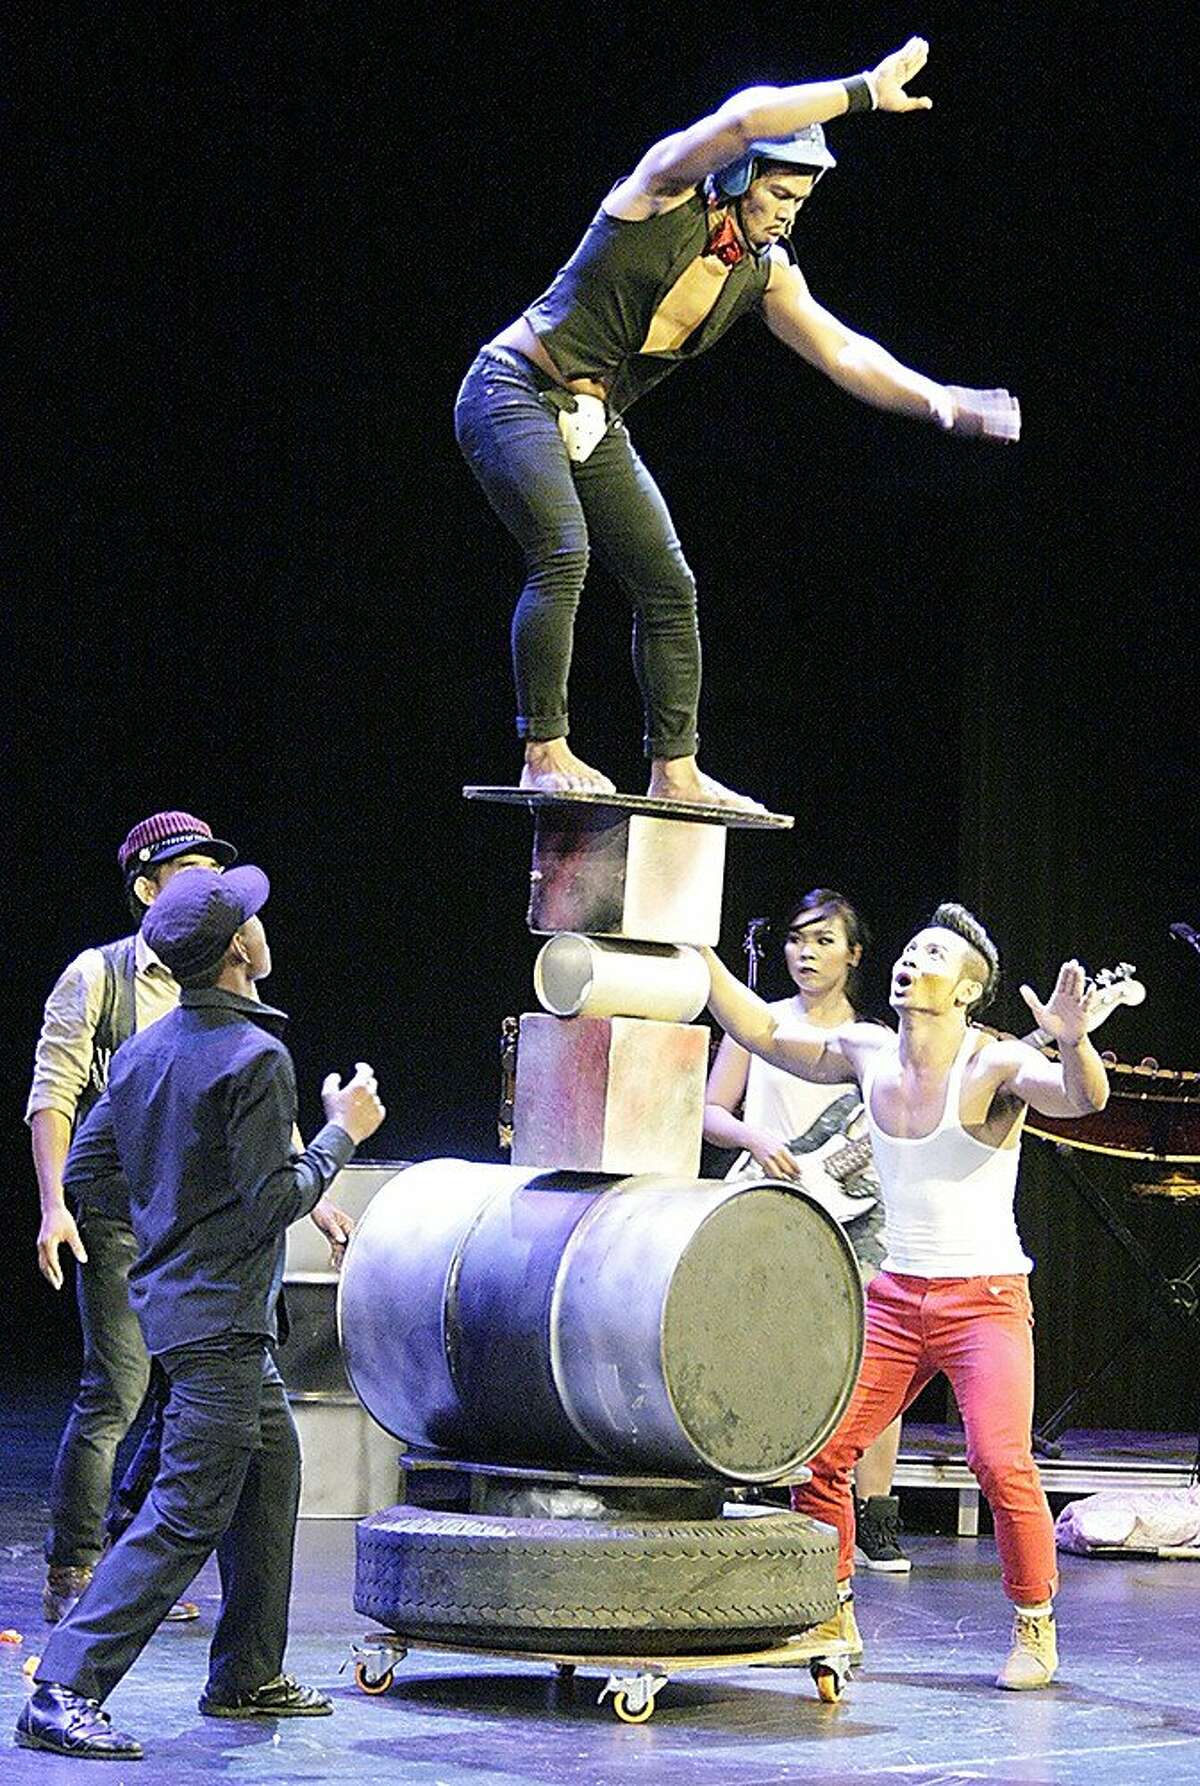 Phare, the Cambodian Circus, performing its show "Khmer Metal" at the first stop on its American tour, in Long Beach LONG BEACH - SEPTEMBER 20: PHARE, The Cambodian Circus, performs the US premiere of "Khmer Metal" at the Richard & Karen Carpenter Performing Arts Center at Cal State Long Beach in Long Beach, CA on September 20, 2015. (Photo: Michael Burr)